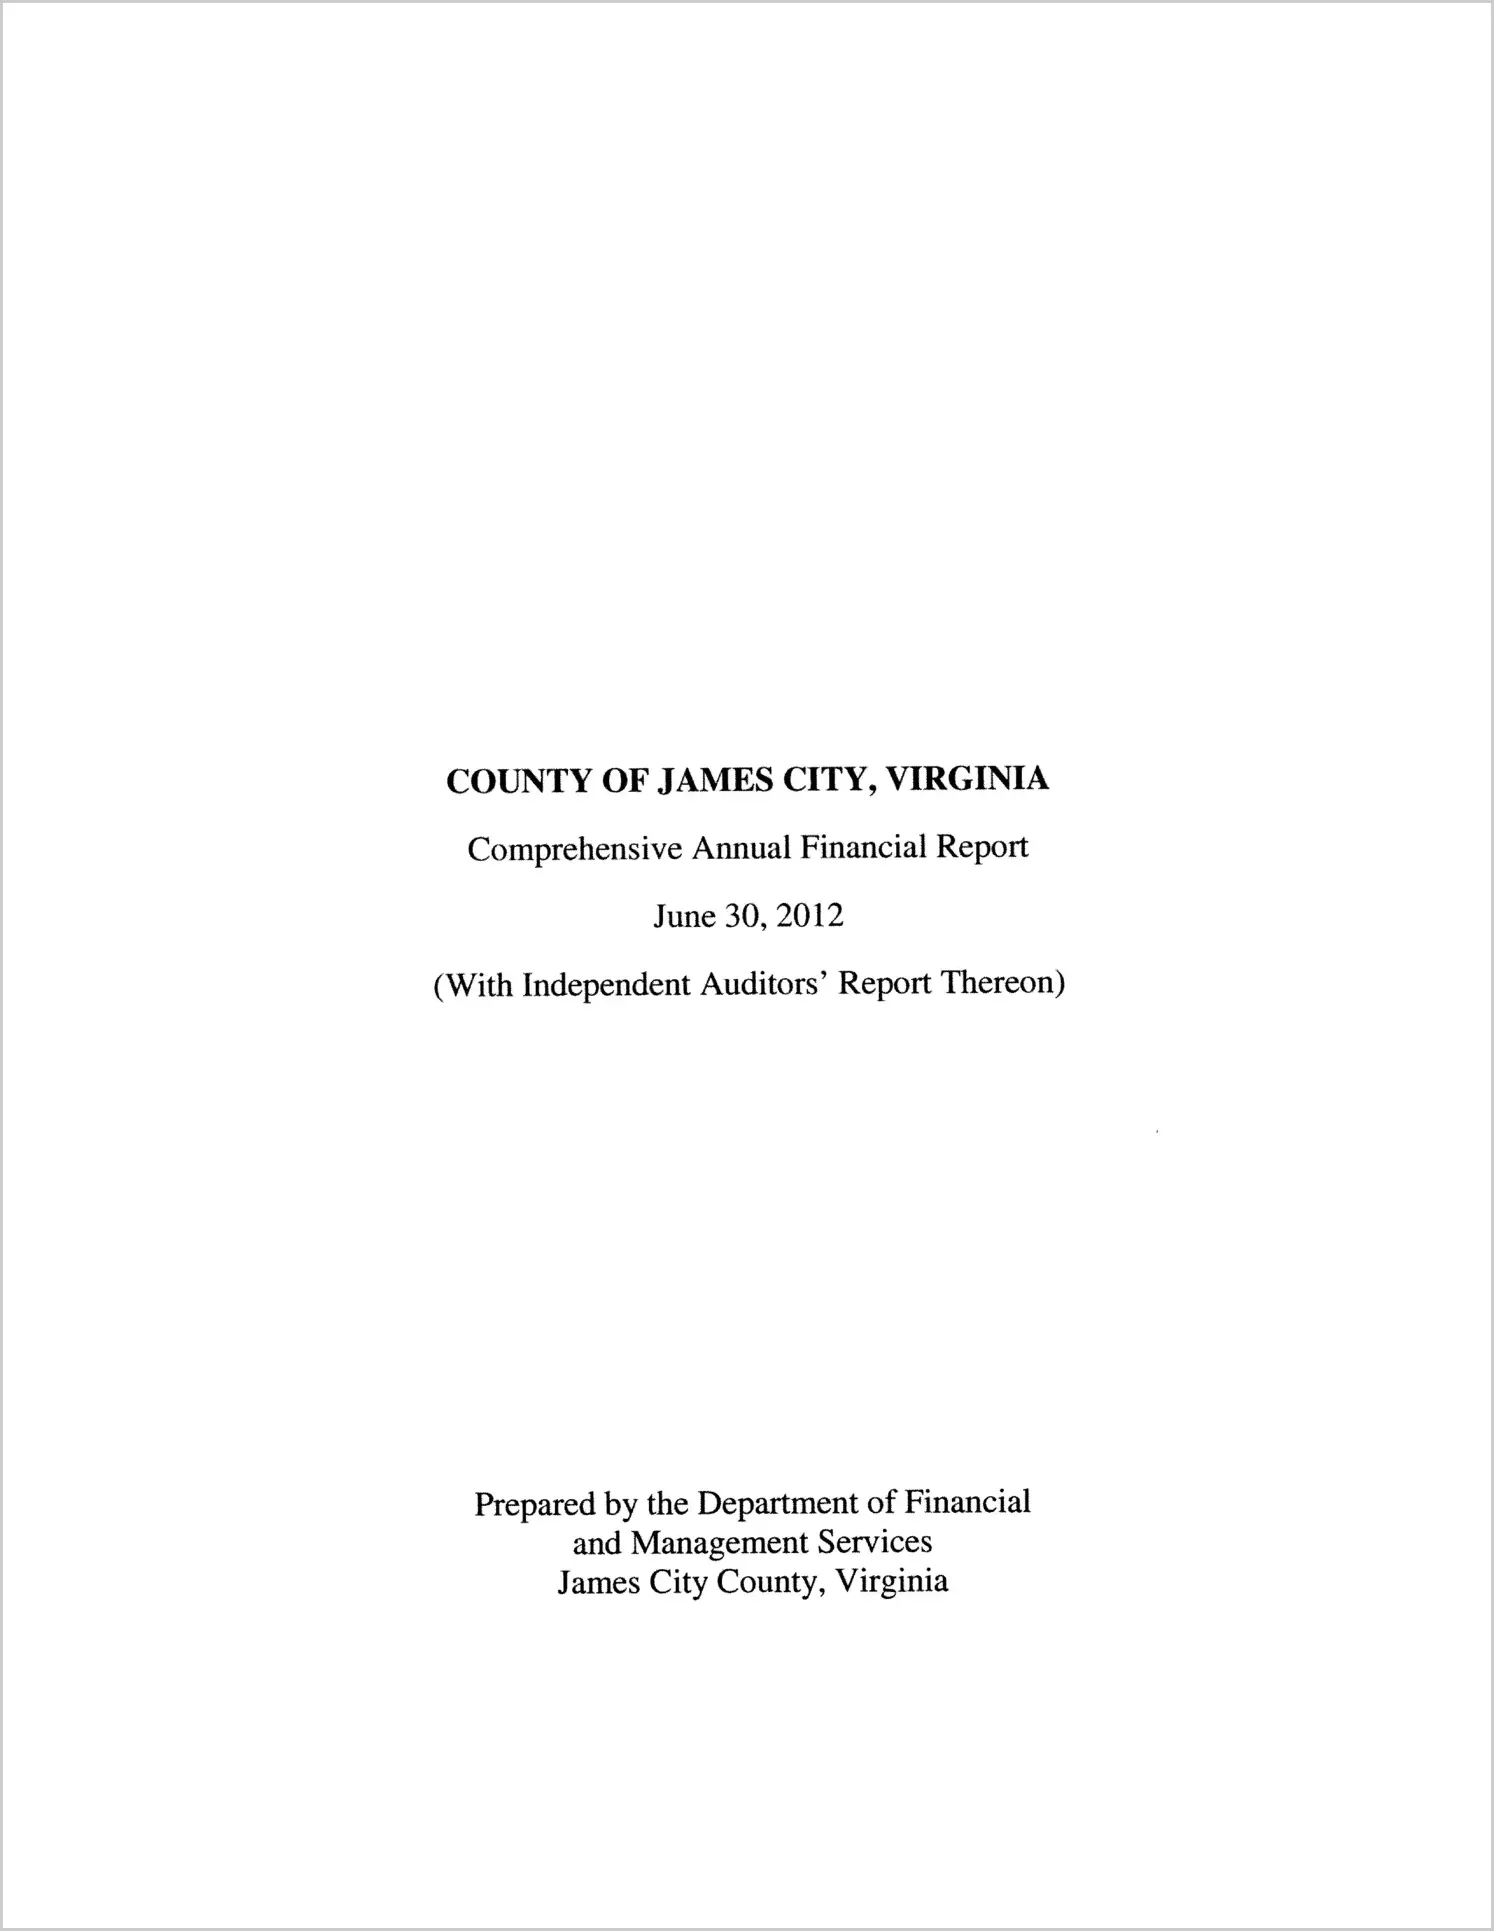 2012 Annual Financial Report for County of James City